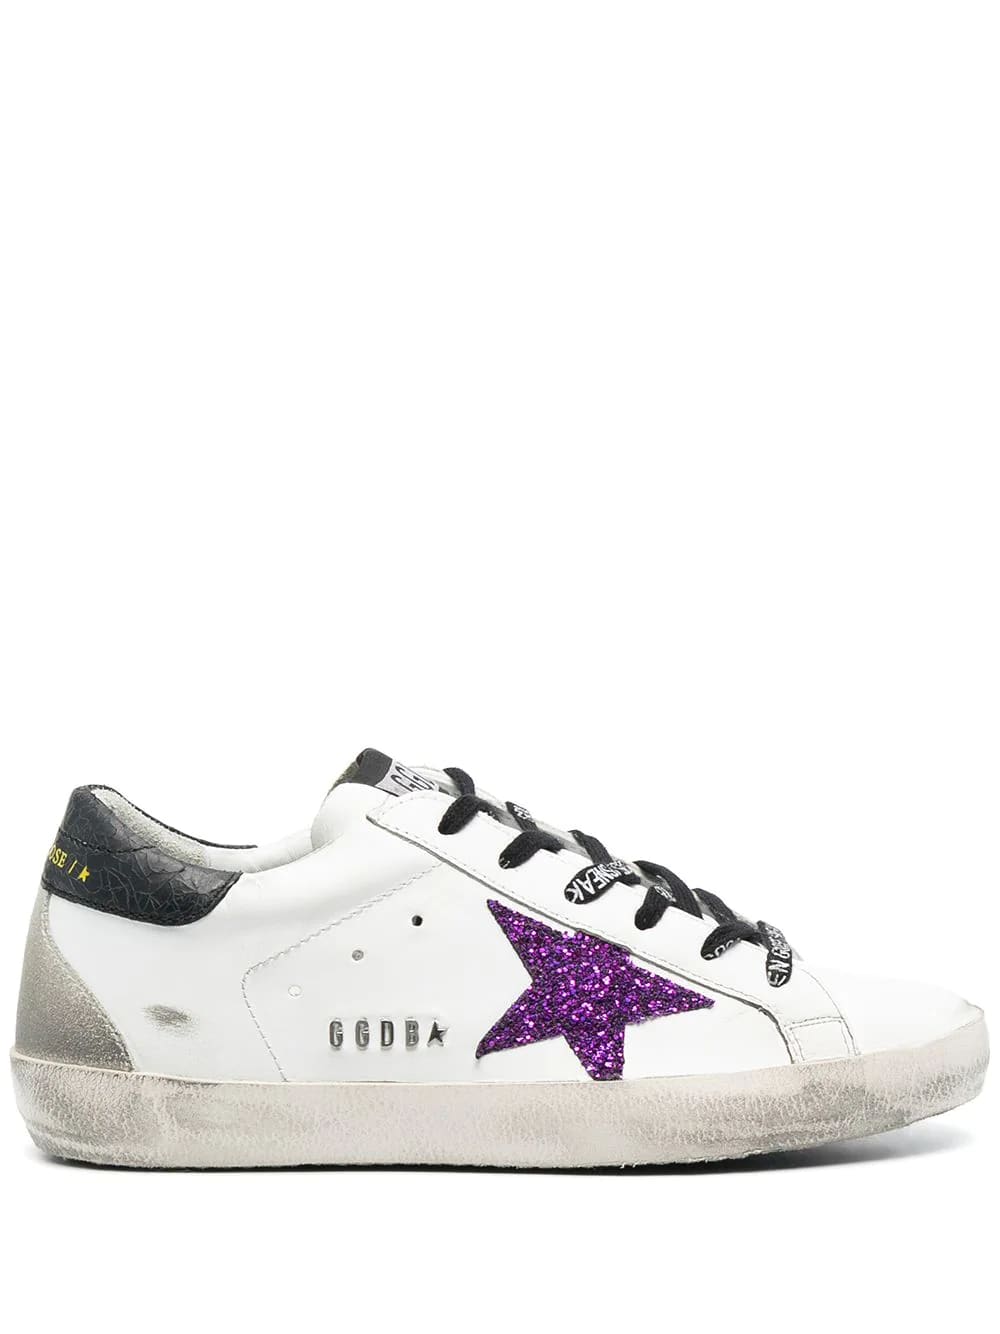 Buy Golden Goose Woman White Super-star Sneakers With Black Spoiler And Purple Glitter Star online, shop Golden Goose shoes with free shipping